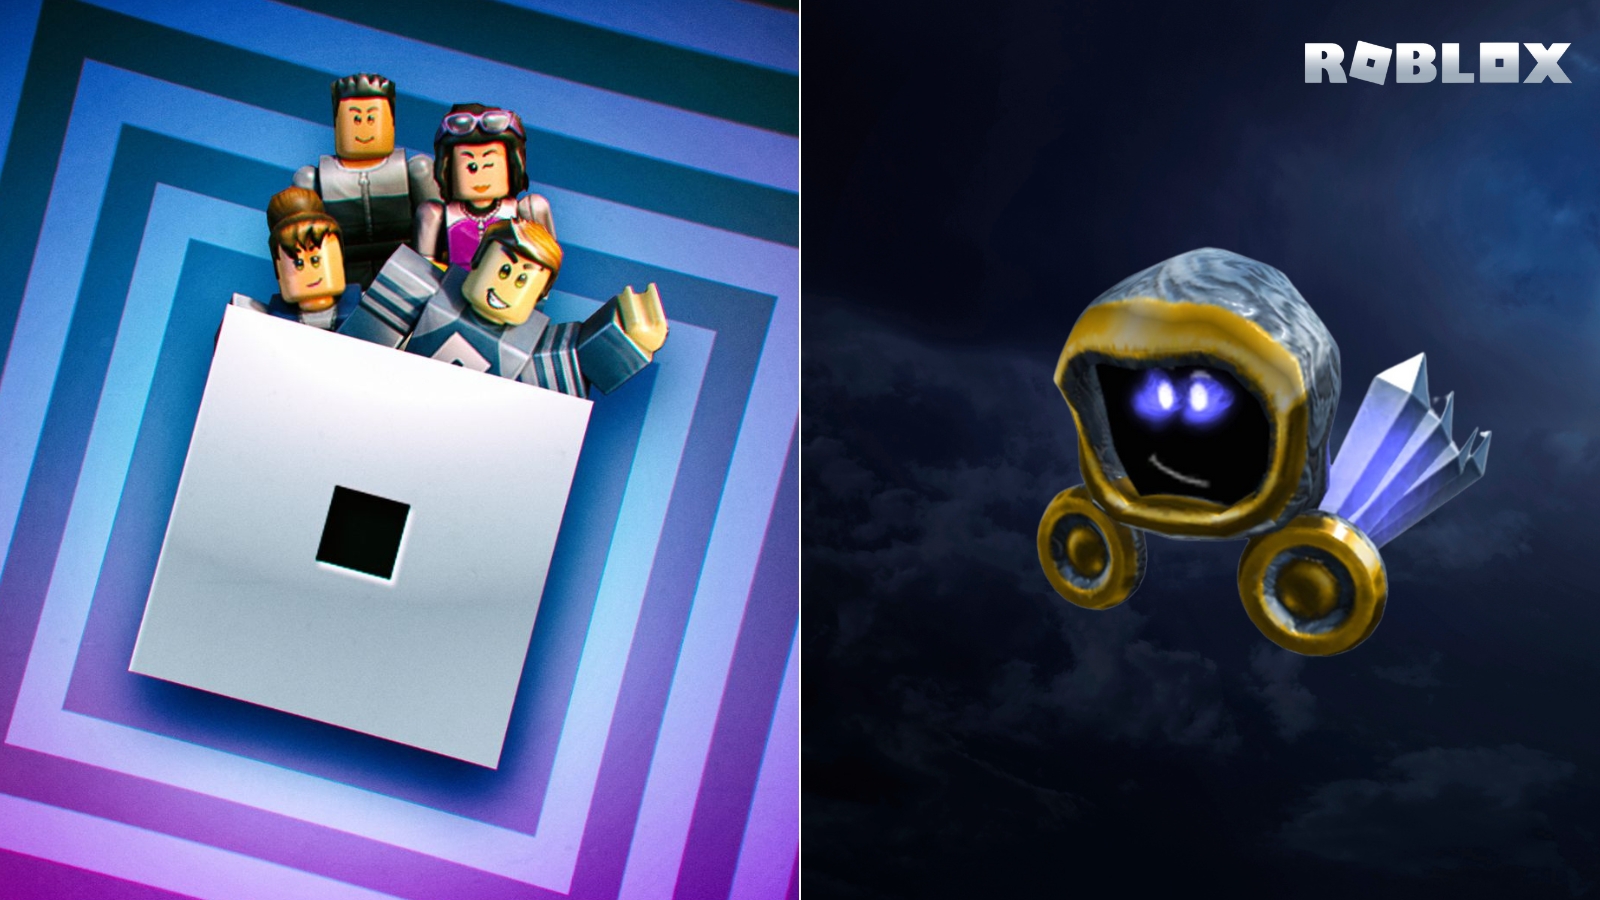 Roblox - It's anybody's game! The Dominus CAN be yours